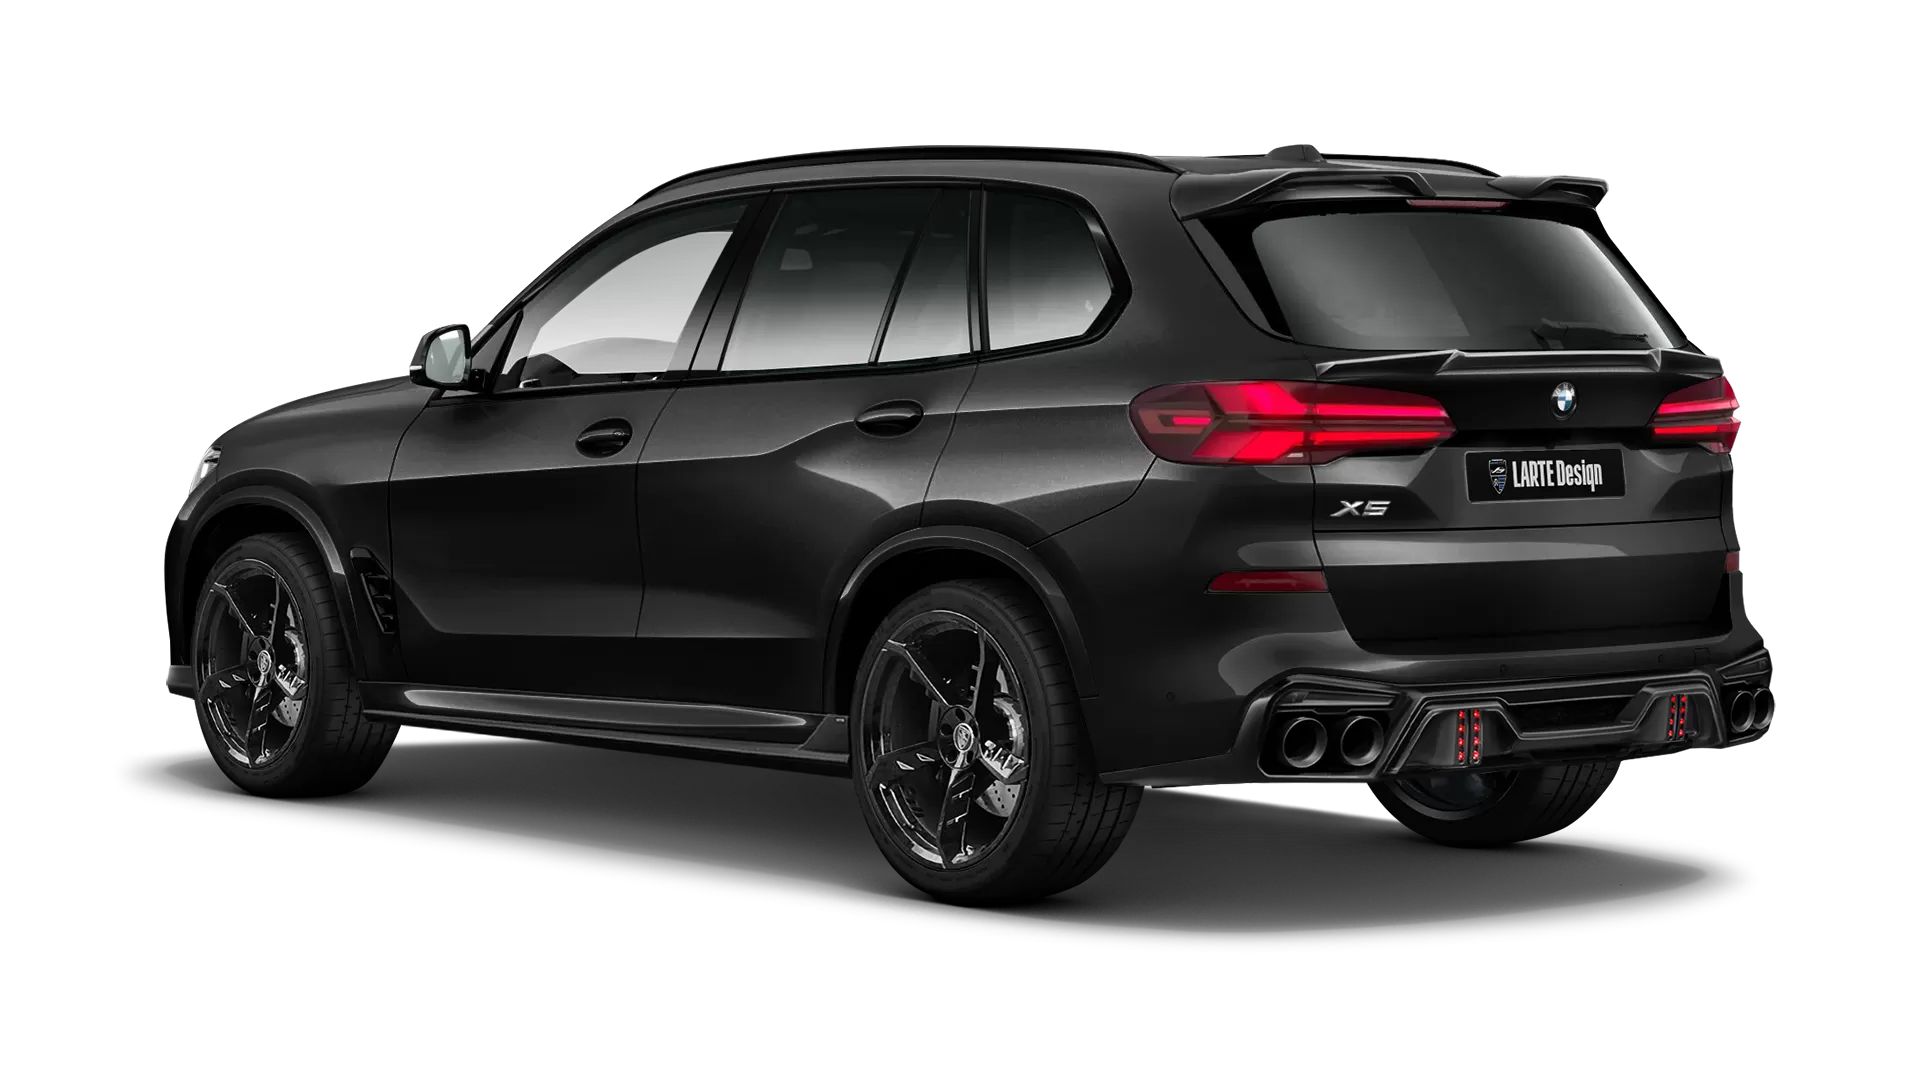 BMW X5 G05 LCI Facelift with painted body kit: rear view shown in Sapphire Black